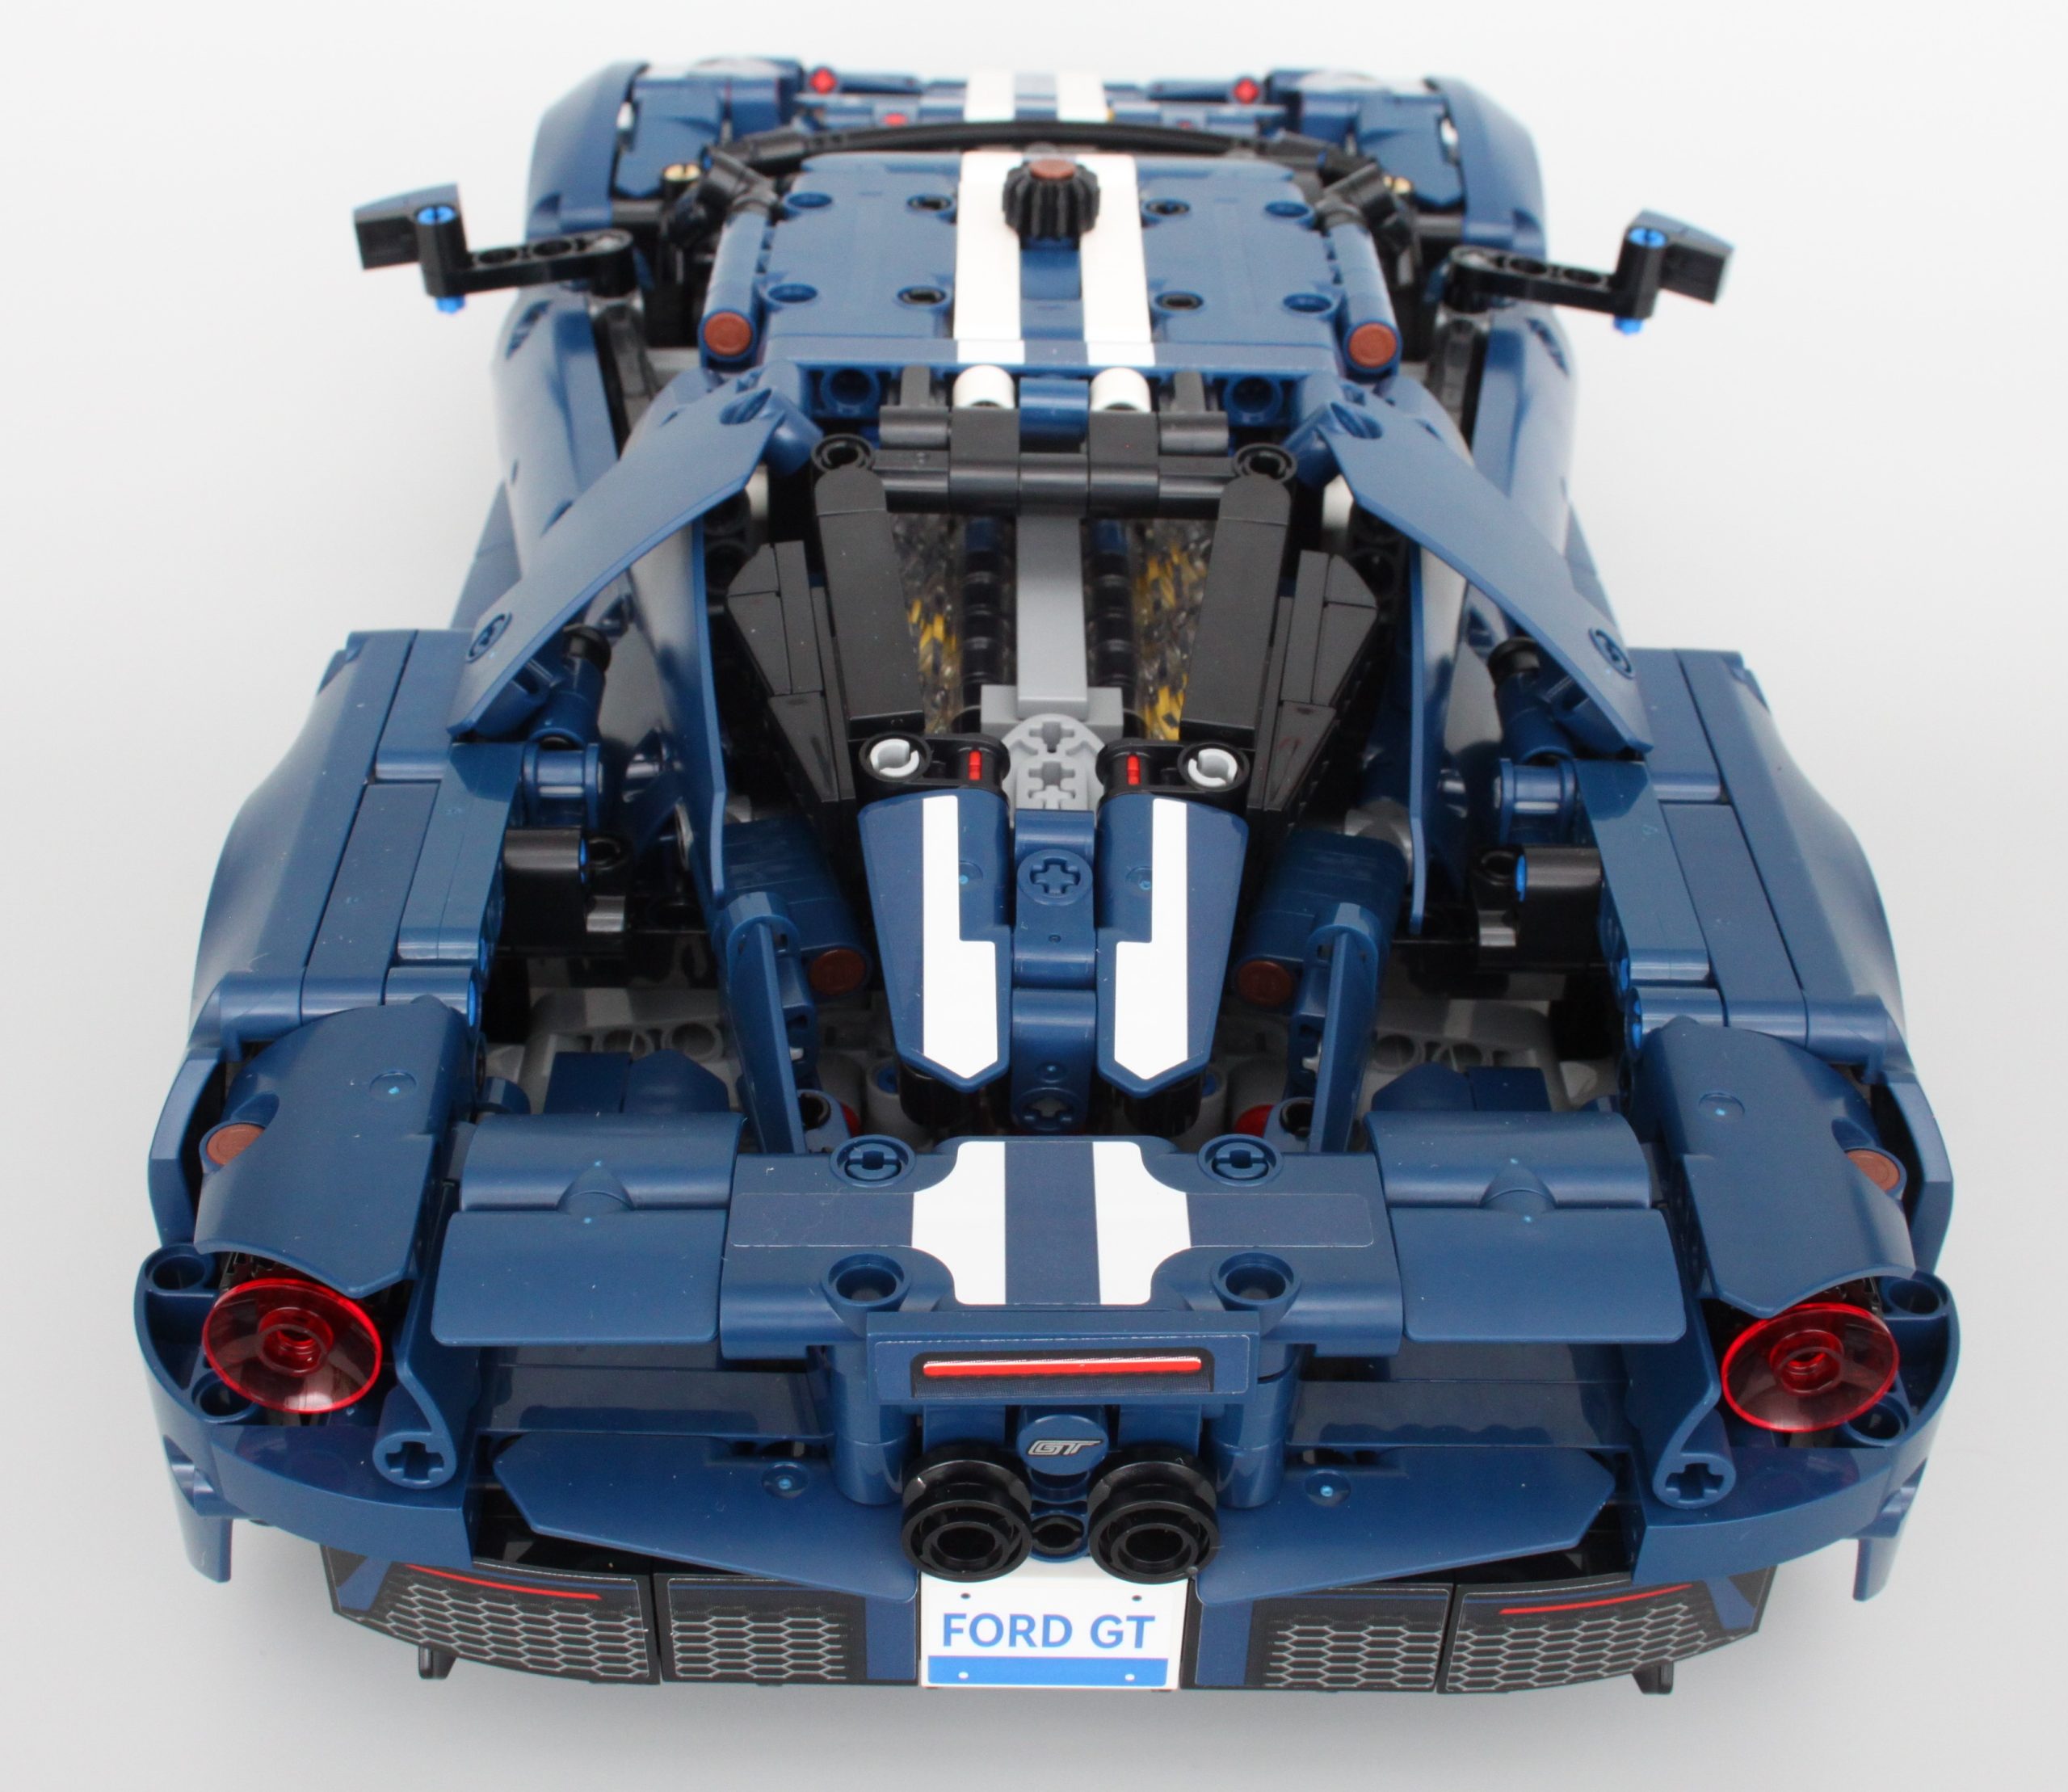 How long does the Ford GT Lego set take to build?